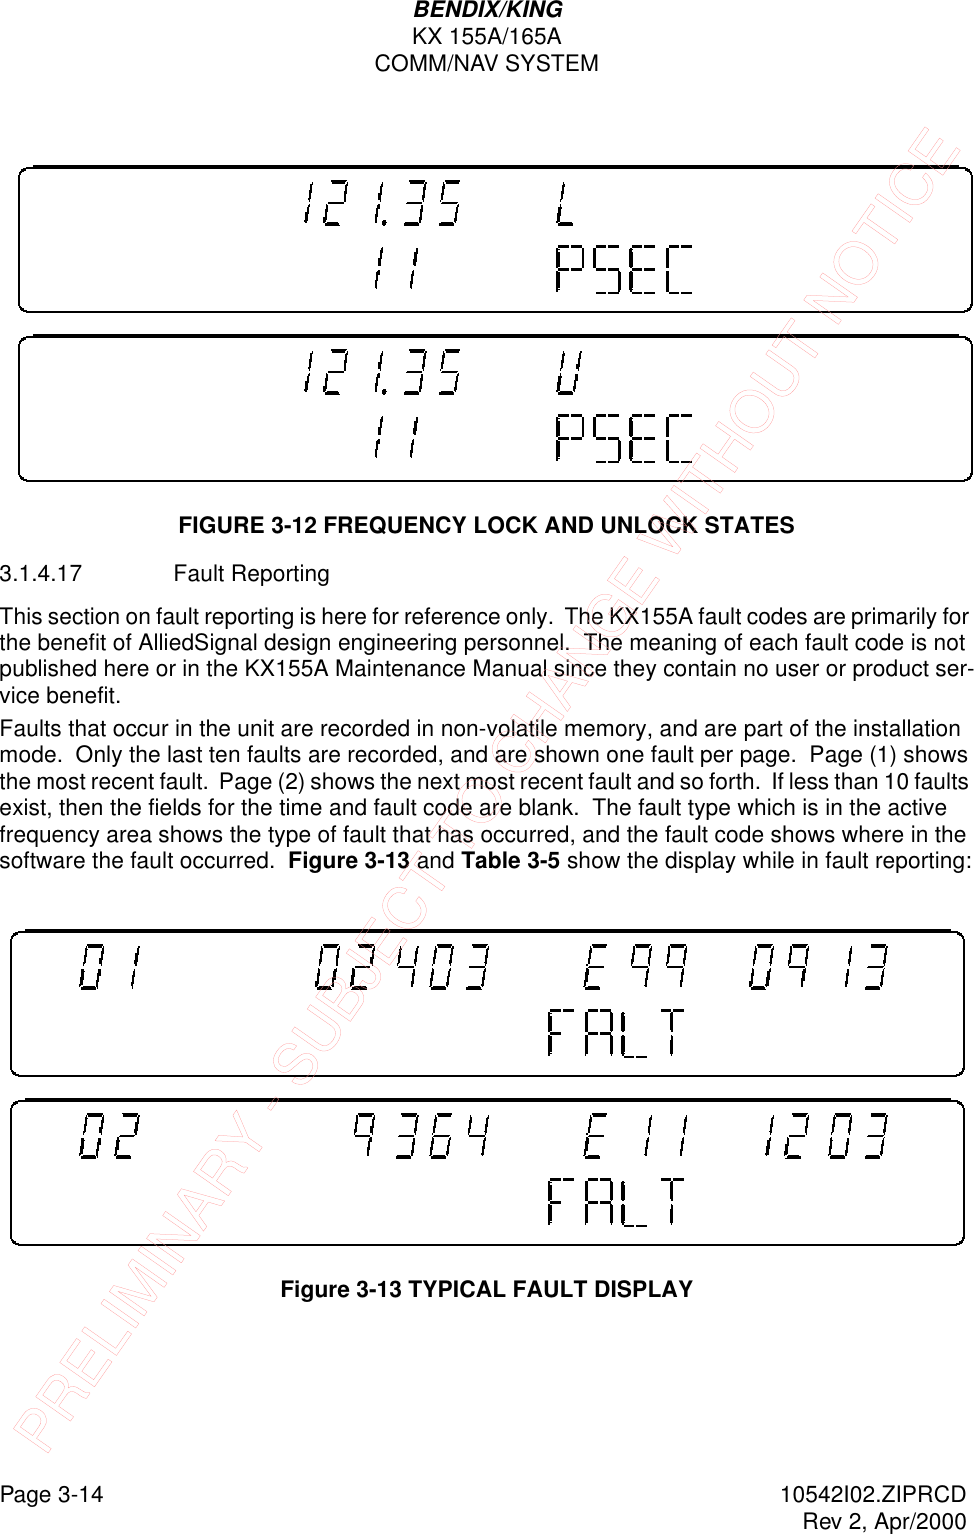 Page 3-14 10542I02.ZIPRCDRev 2, Apr/2000BENDIX/KINGKX 155A/165ACOMM/NAV SYSTEMFIGURE 3-12 FREQUENCY LOCK AND UNLOCK STATES3.1.4.17 Fault ReportingThis section on fault reporting is here for reference only.  The KX155A fault codes are primarily for the benefit of AlliedSignal design engineering personnel.  The meaning of each fault code is not published here or in the KX155A Maintenance Manual since they contain no user or product ser-vice benefit.  Faults that occur in the unit are recorded in non-volatile memory, and are part of the installation mode.  Only the last ten faults are recorded, and are shown one fault per page.  Page (1) shows the most recent fault.  Page (2) shows the next most recent fault and so forth.  If less than 10 faults exist, then the fields for the time and fault code are blank.  The fault type which is in the active frequency area shows the type of fault that has occurred, and the fault code shows where in the software the fault occurred.  Figure 3-13 and Table 3-5 show the display while in fault reporting: Figure 3-13 TYPICAL FAULT DISPLAYPRELIMINARY - SUBJECT TO CHANGE WITHOUT NOTICE